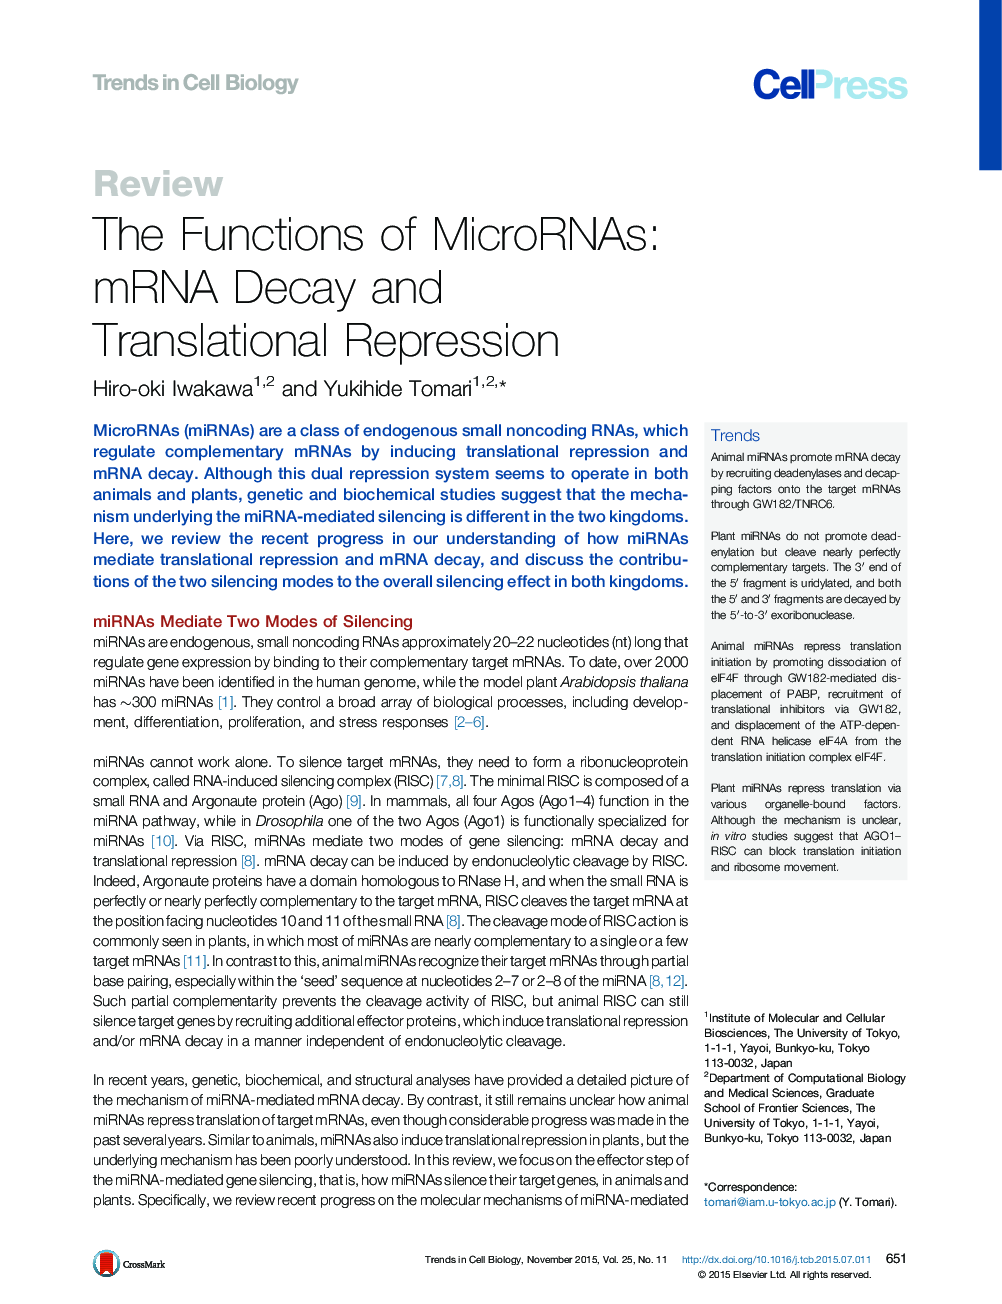 The Functions of MicroRNAs: mRNA Decay and Translational Repression